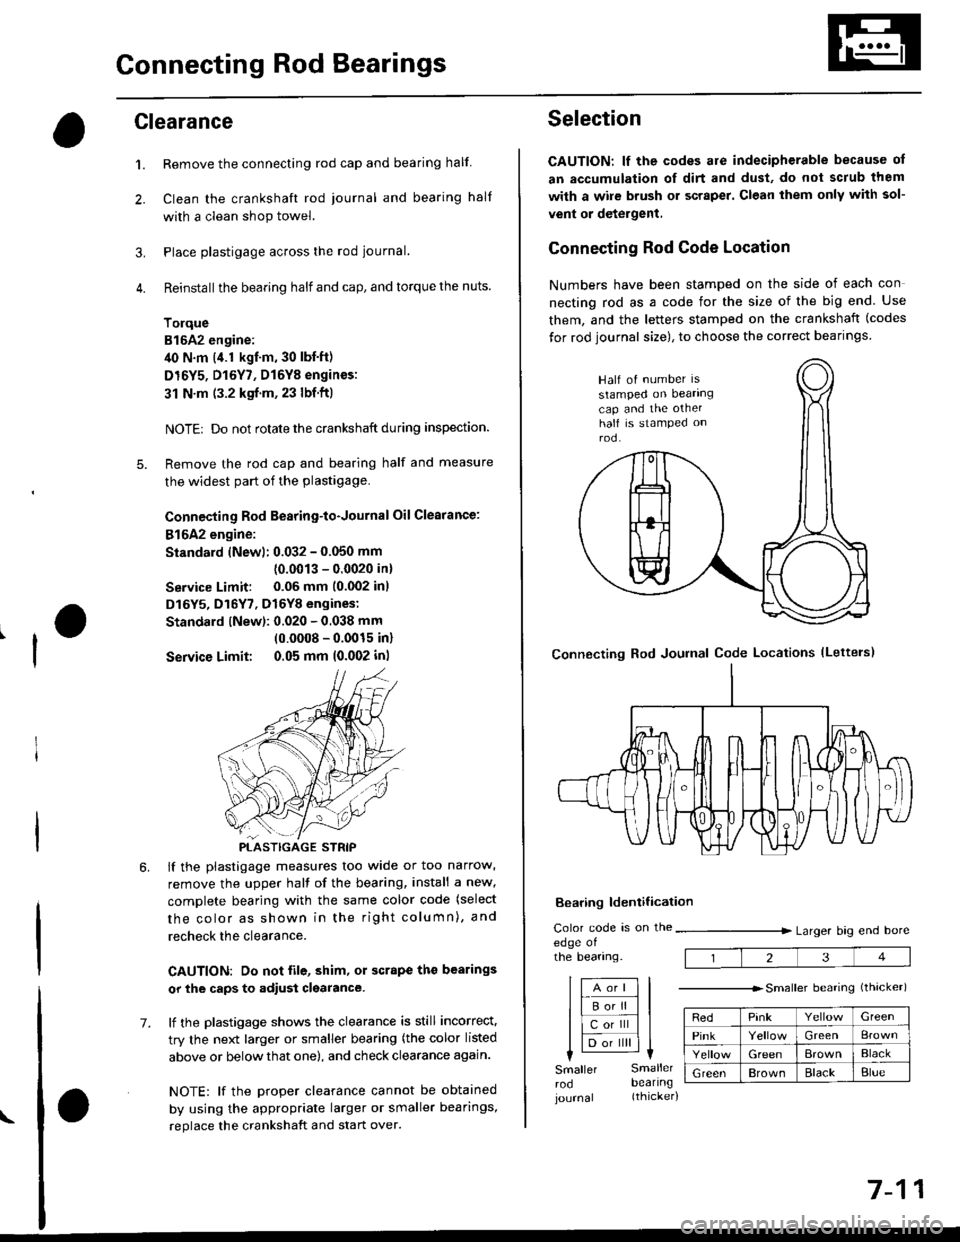 HONDA CIVIC 1997 6.G Workshop Manual Connecting Rod Bearings
Clearance
Remove the connecting rod cap and bearing half
Clean the crankshaft rod iournal and bearing half
with a clean shop towel.
Place plastigage across the rod journal.
Rei